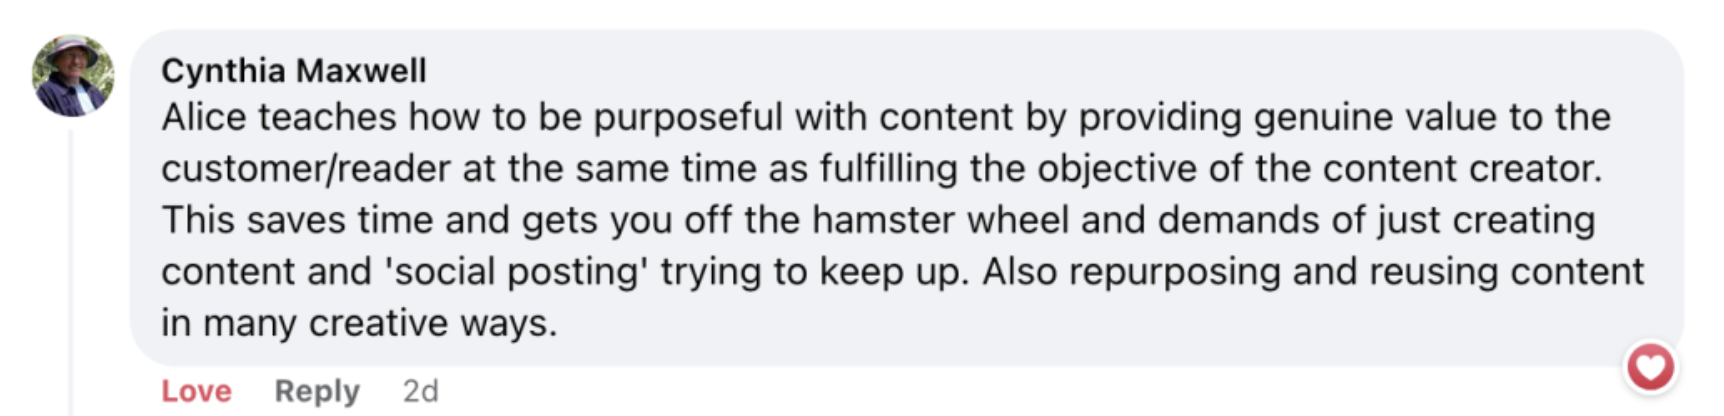 Just get off that hamster wheel!